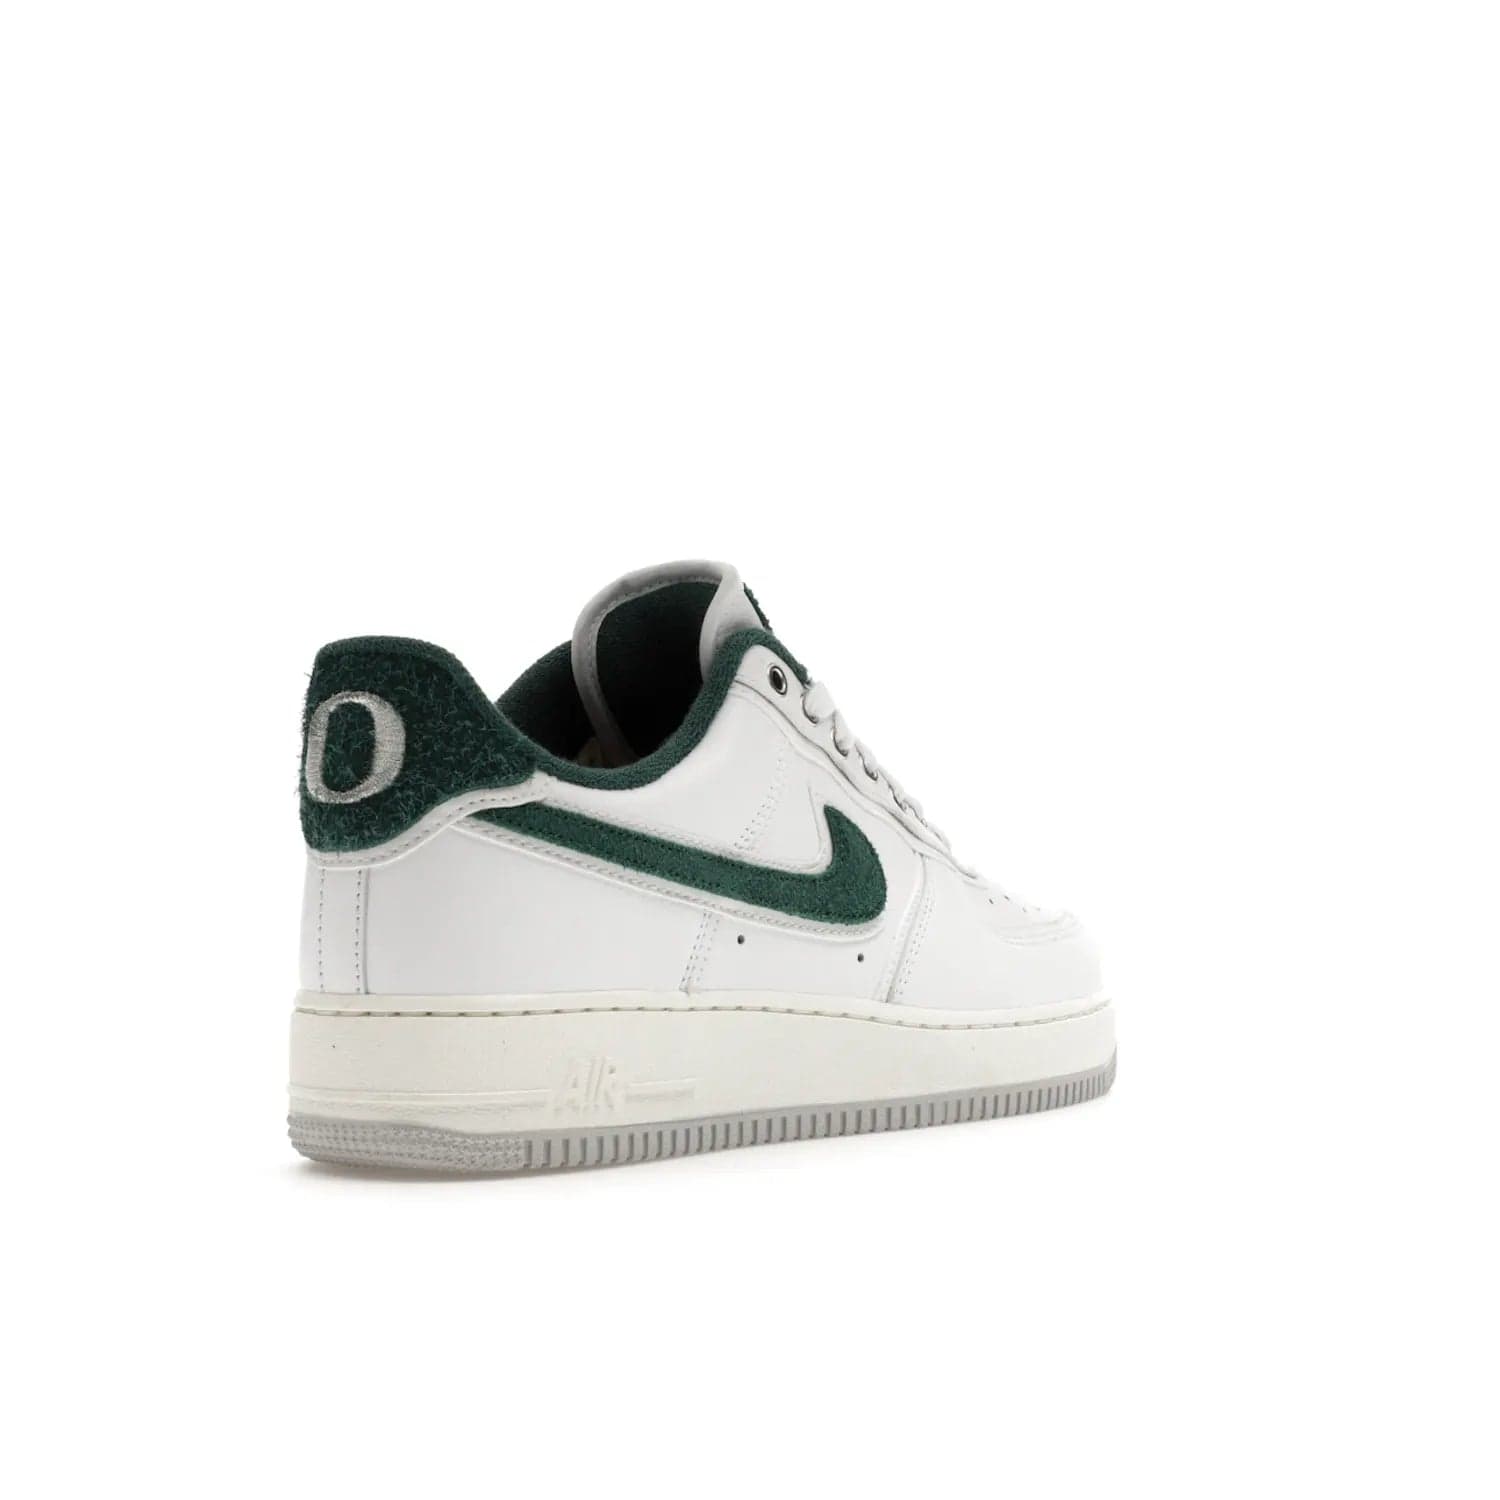 Nike Air Force 1 Low '07 Premium University of Oregon PE - Image 32 - Only at www.BallersClubKickz.com - The Nike Air Force 1 Low '07 Premium. Special Oregon University colorway. White base with green and sail accents. Cushioned rubber midsole. Comfort and style. Support your school!